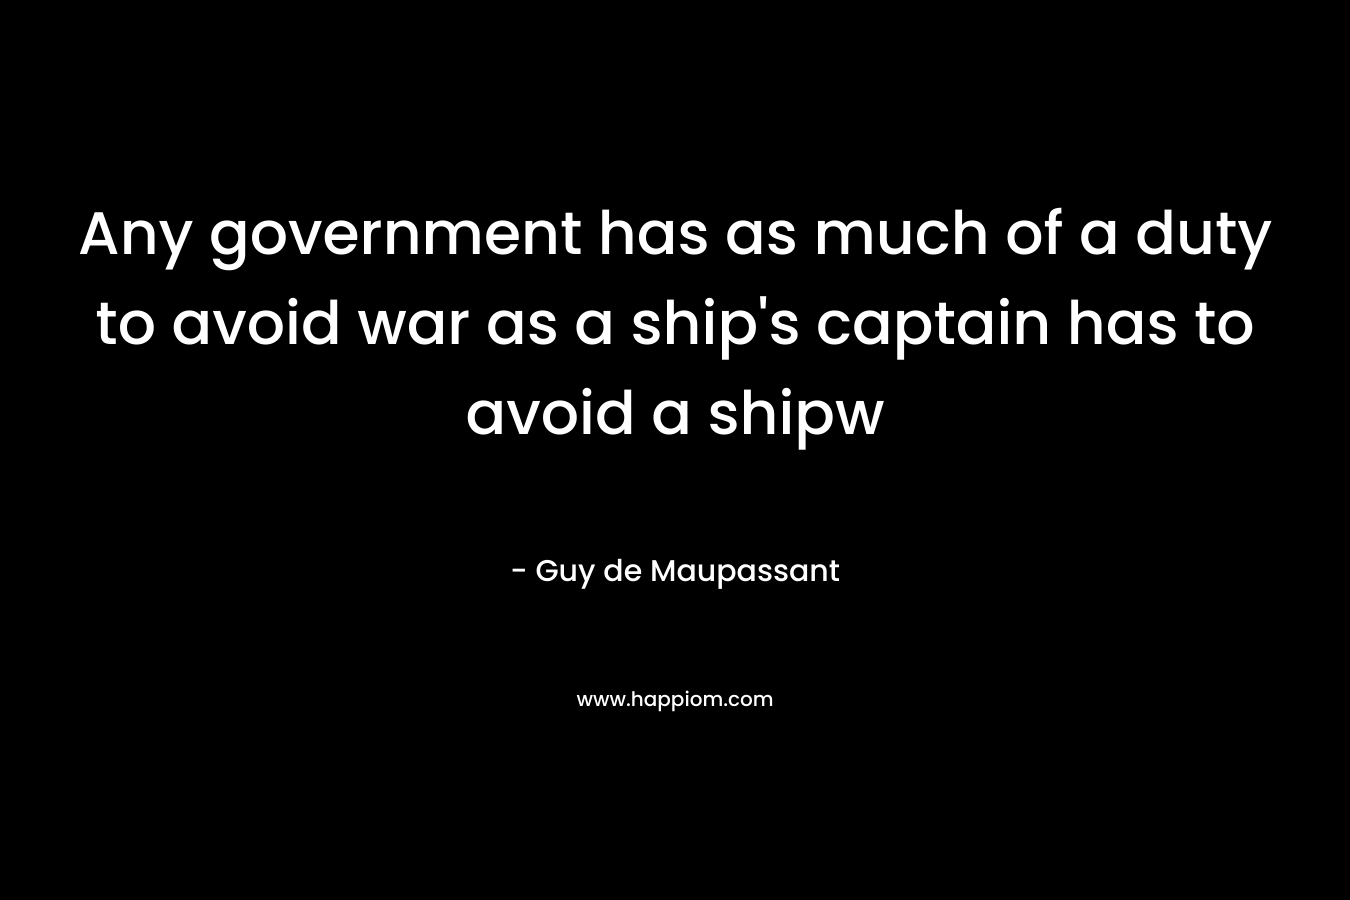 Any government has as much of a duty to avoid war as a ship's captain has to avoid a shipw